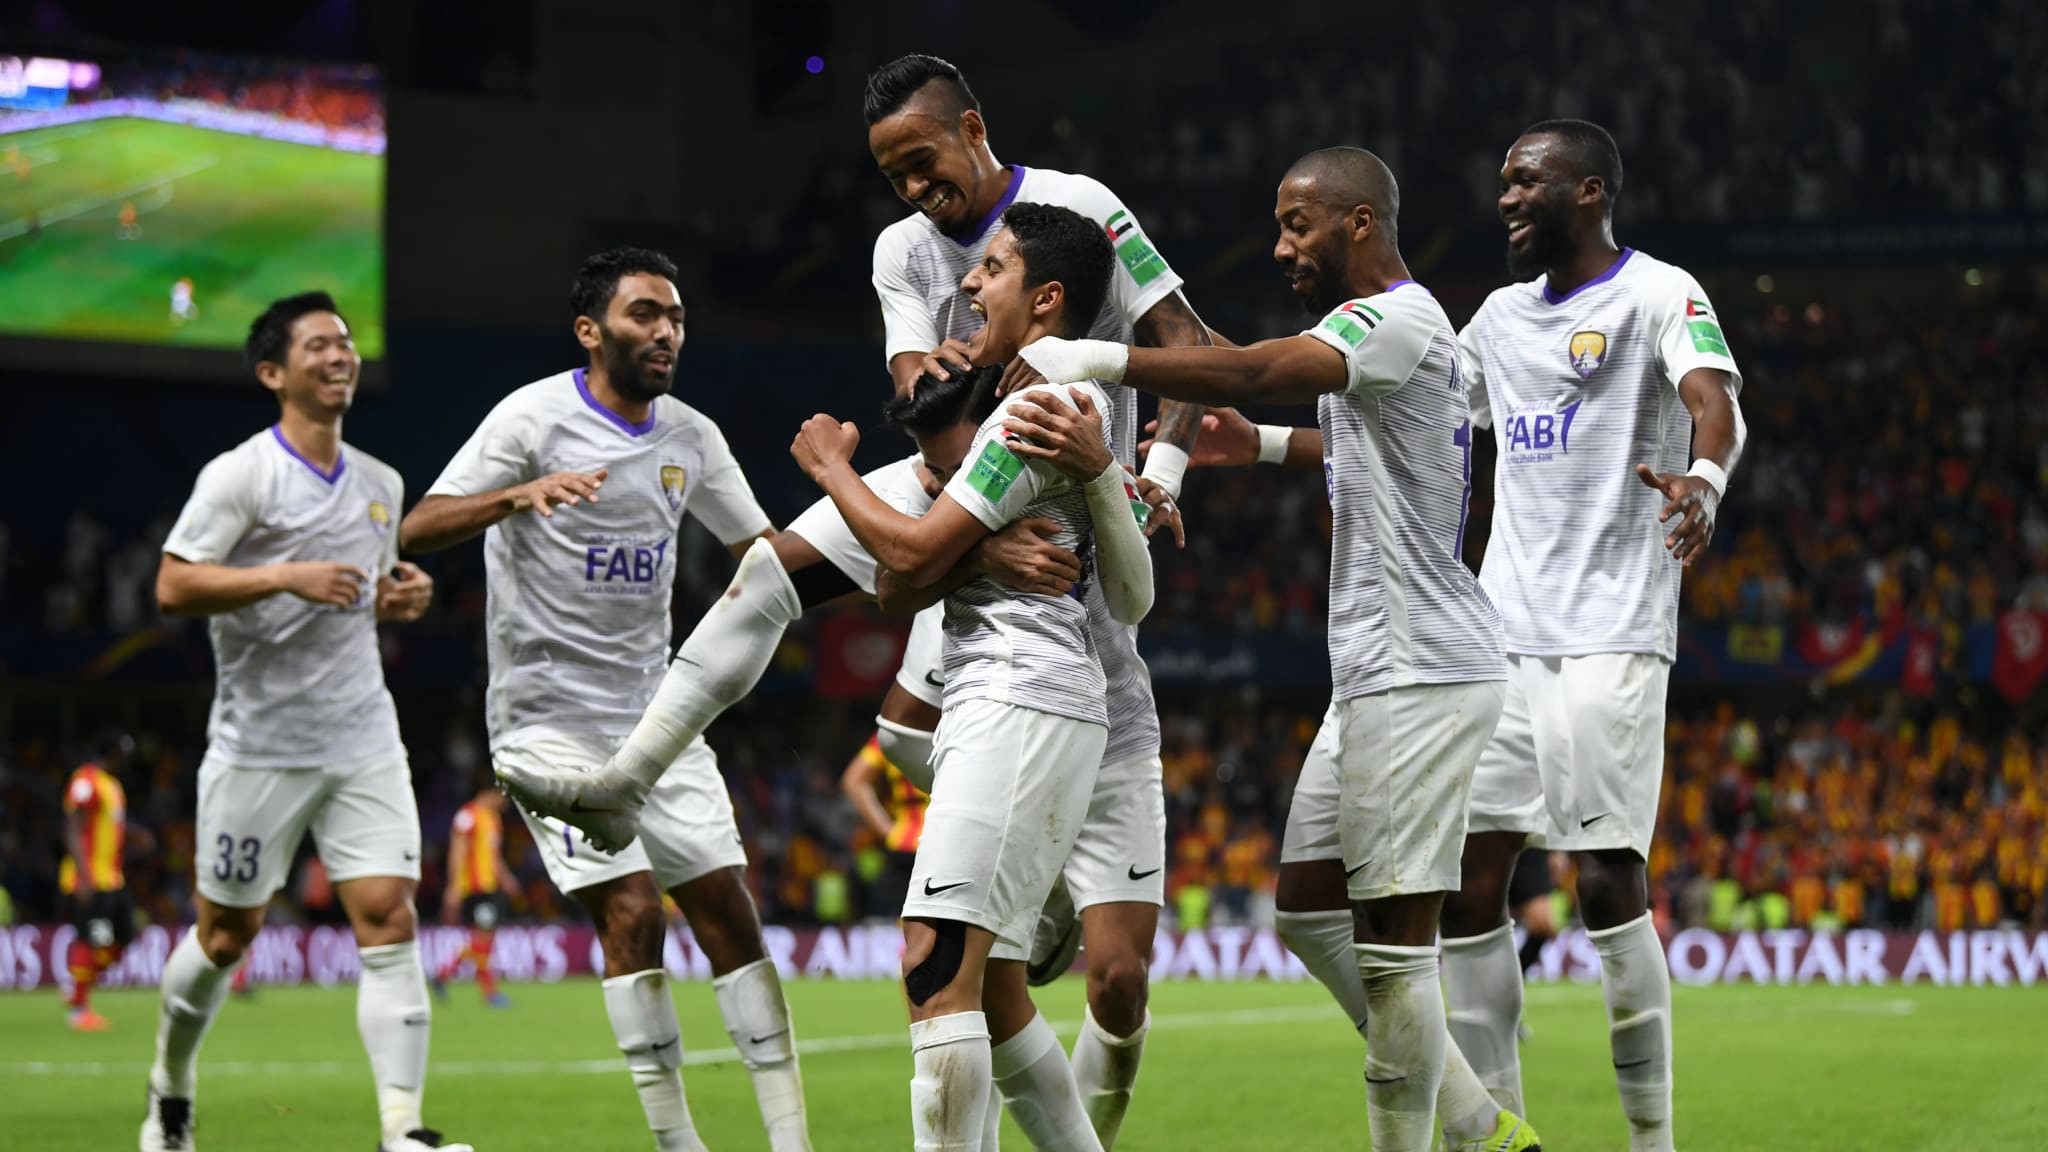 Home side Al Ain today reached the semi-finals of the FIFA Club World Cup in the UAE, where they will next meet River Plate of Argentina ©FIFA